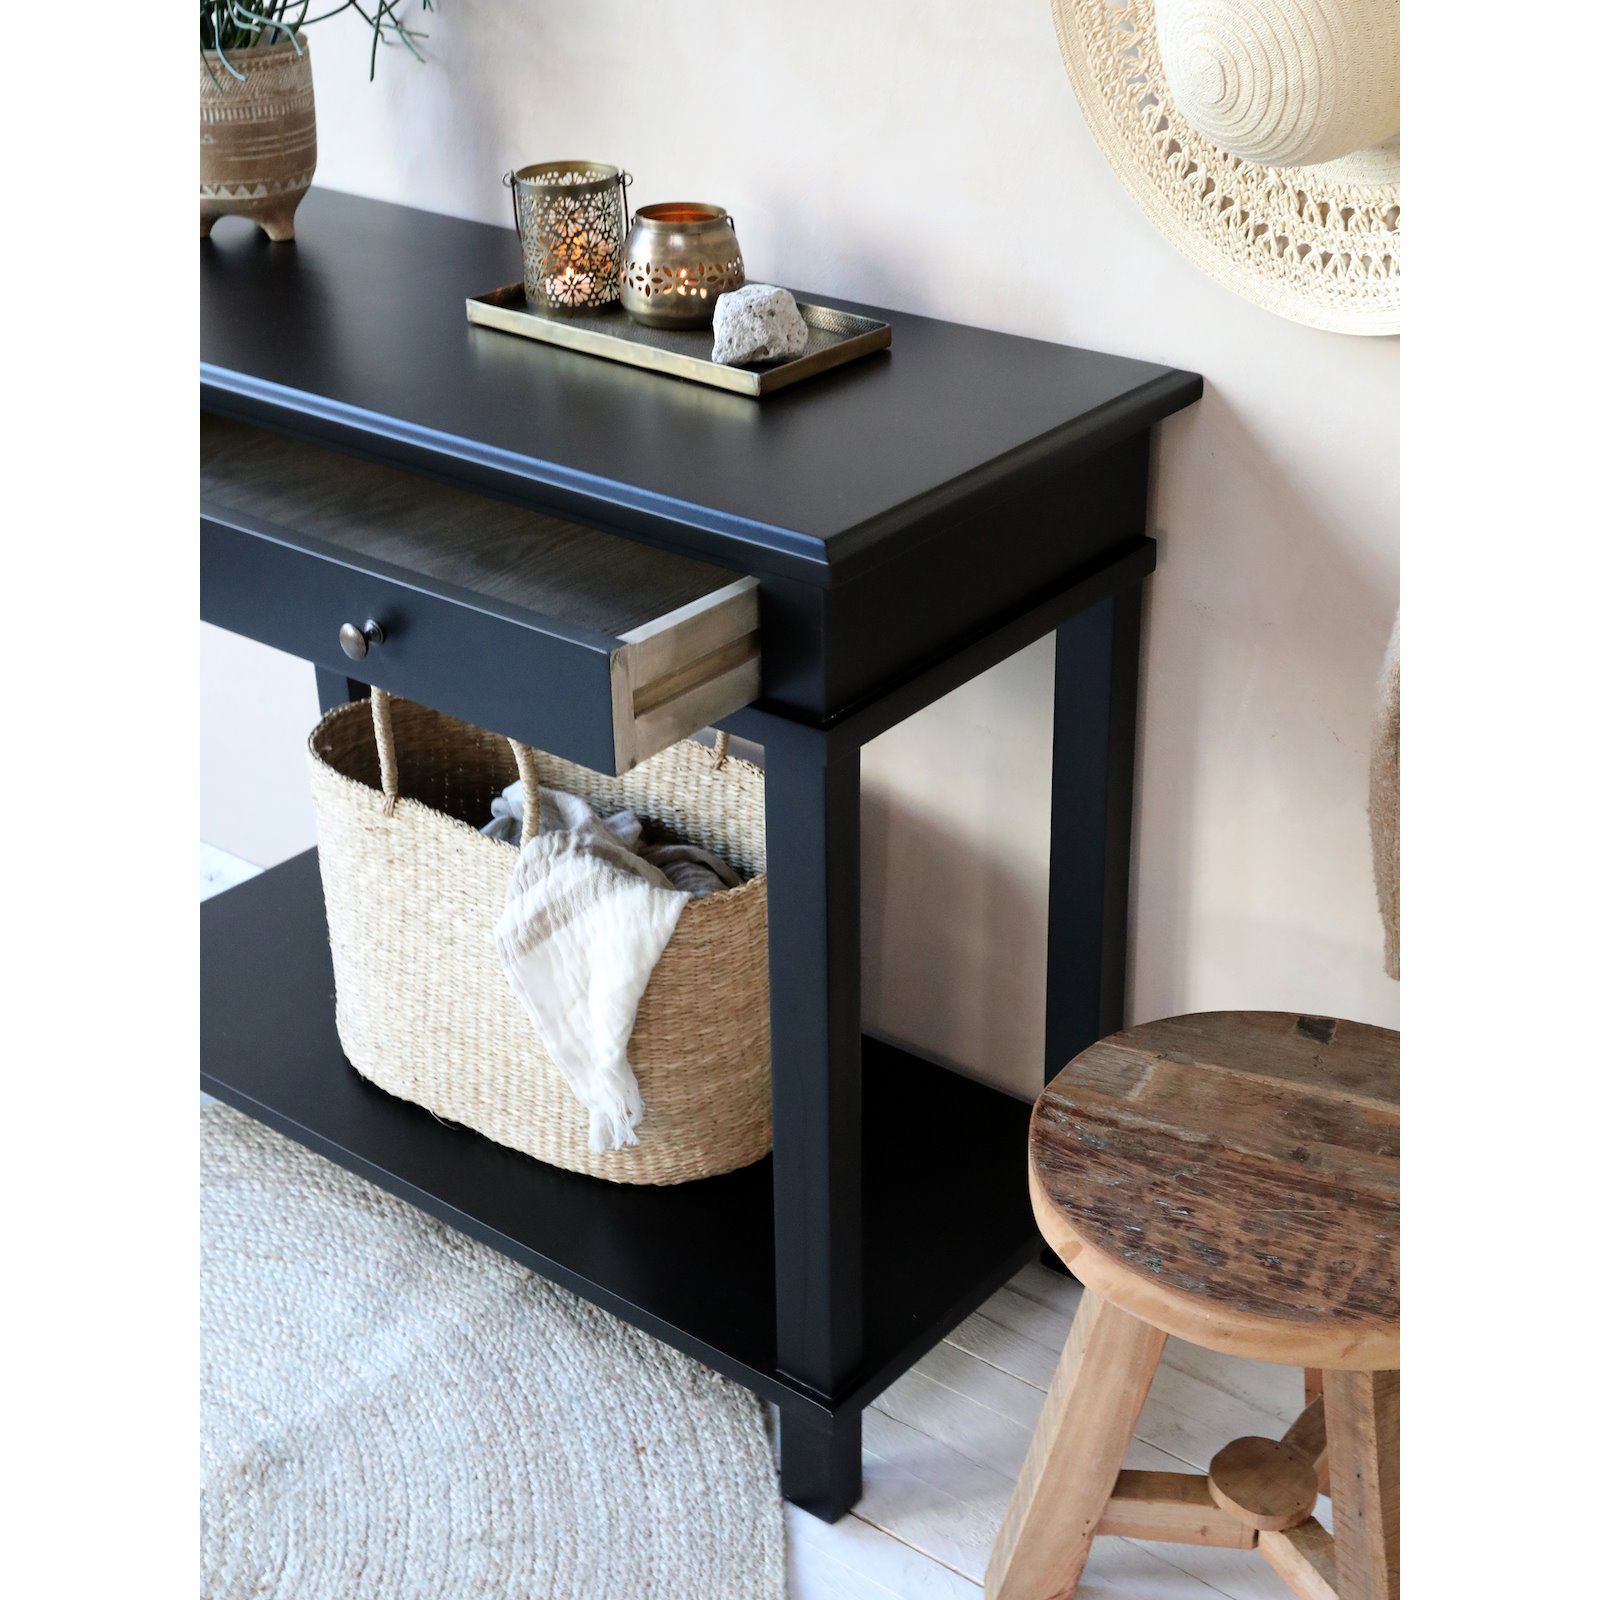 Small Classic Black Console Table With Regard To Caviar Black Console Tables (View 11 of 20)